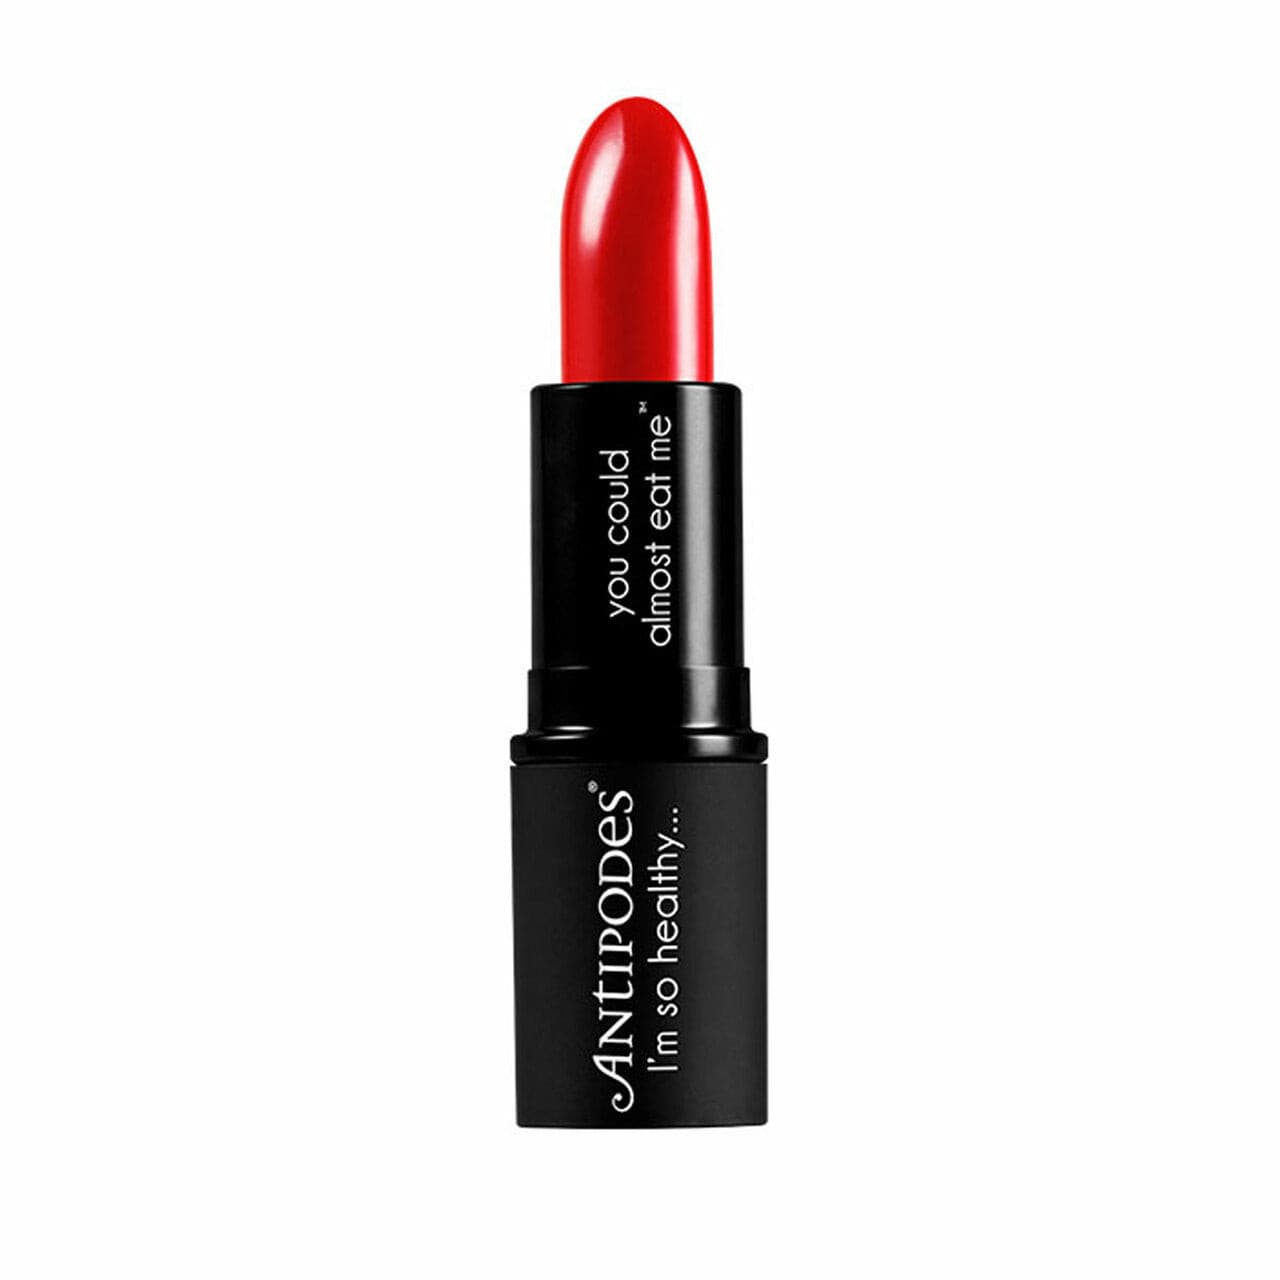 Antipodes Moisture-Boost Natural Lipstick 4g - Forest Berry Red.